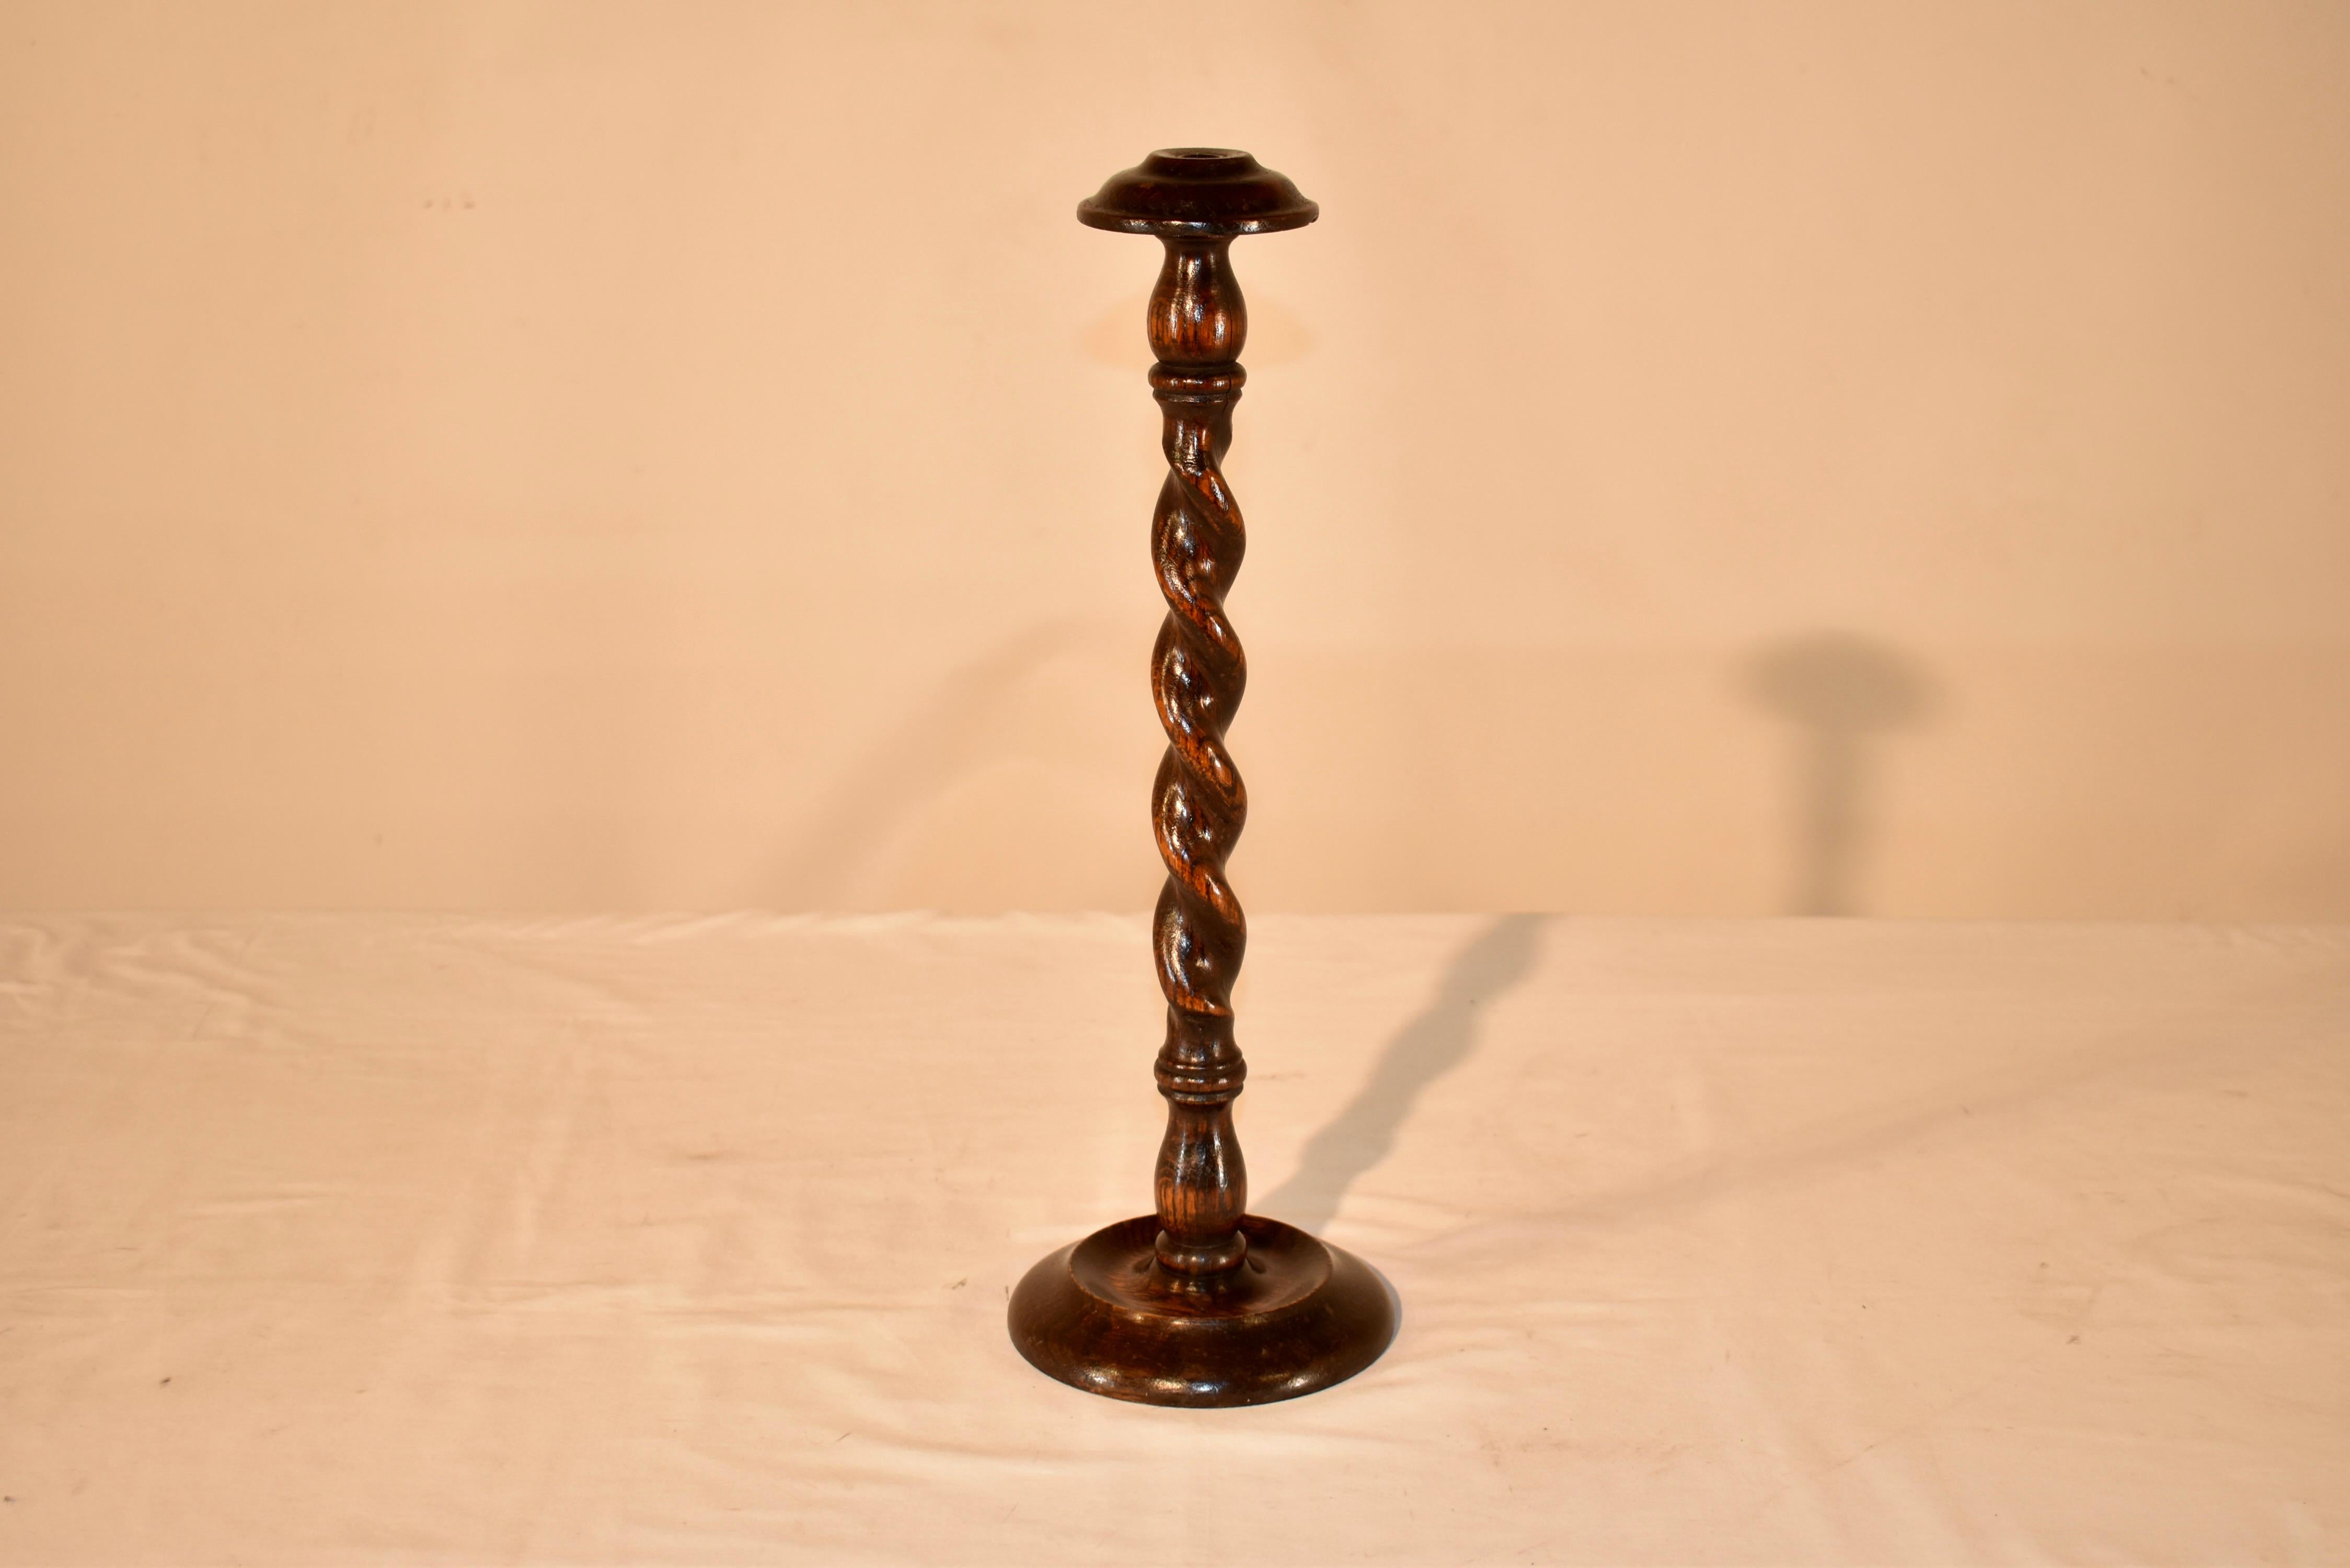 19th century oak hat stand.  The star is made to place a hat  on a dresser or in a dressing room.  The base is dish shaped and is hand turned, along with the stem, which is turned barley twist.  The top on which to place the hat is nicely turned as